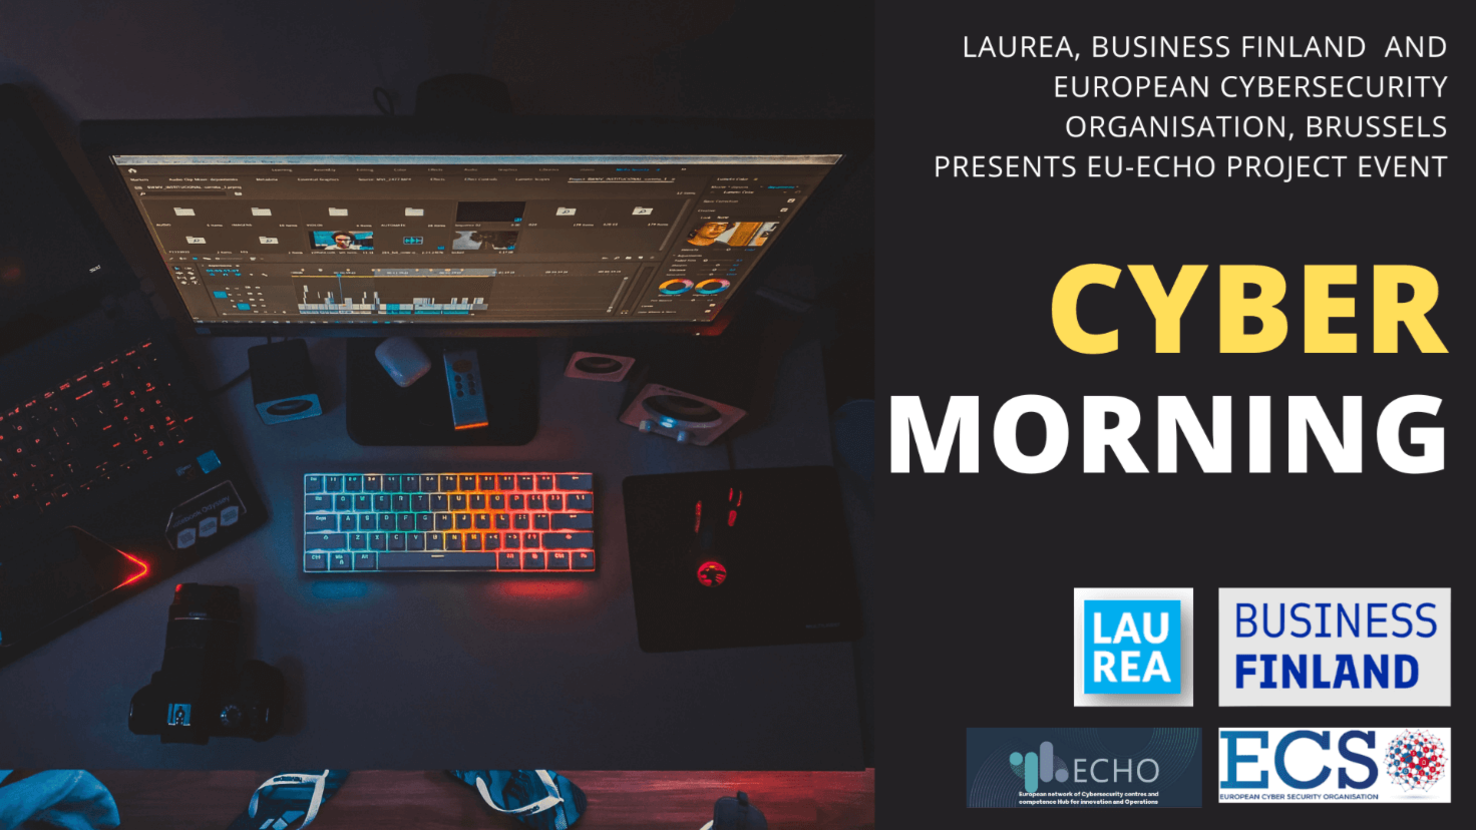 Cyber morning event advert